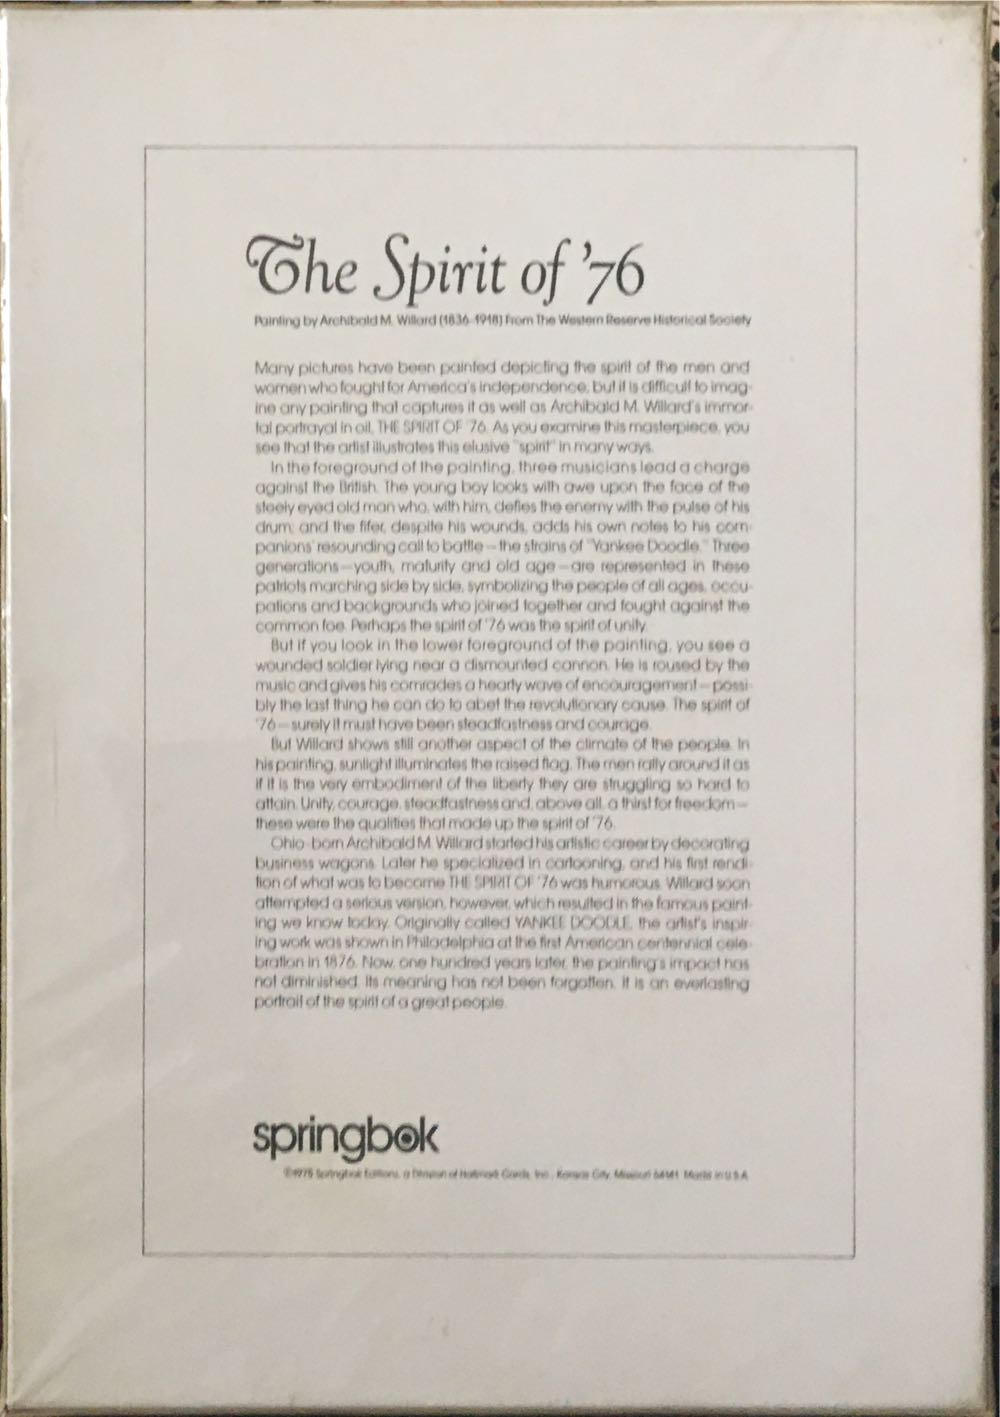 The Spirit Of ‘76 - Springbok puzzle collectible - Main Image 2